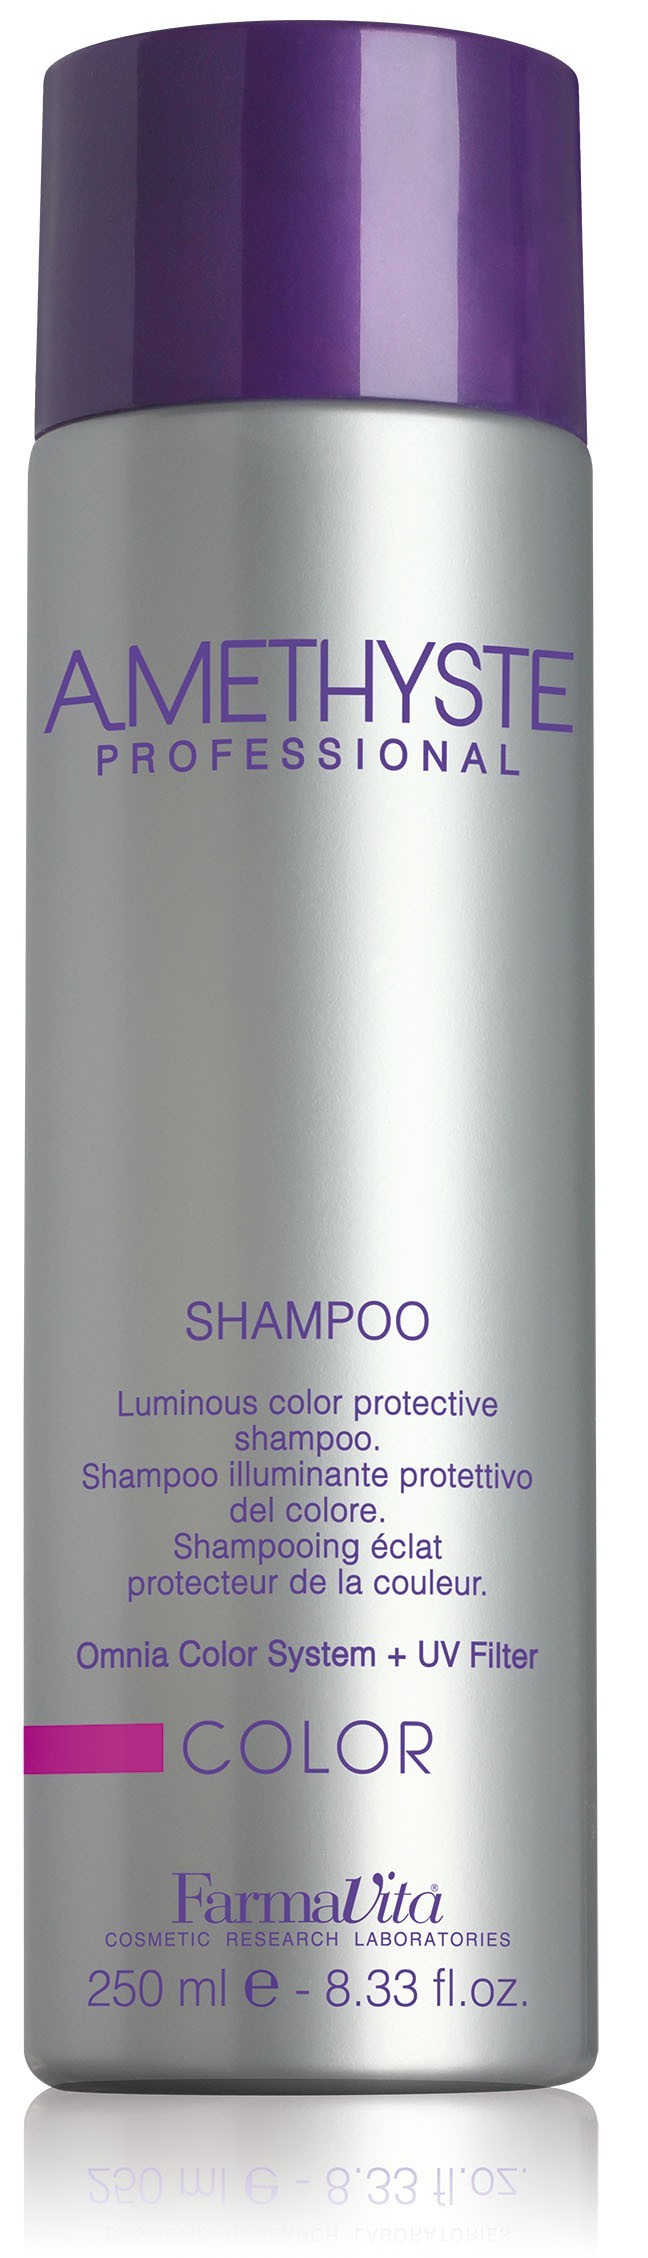 Shampoing Amethyste Color...